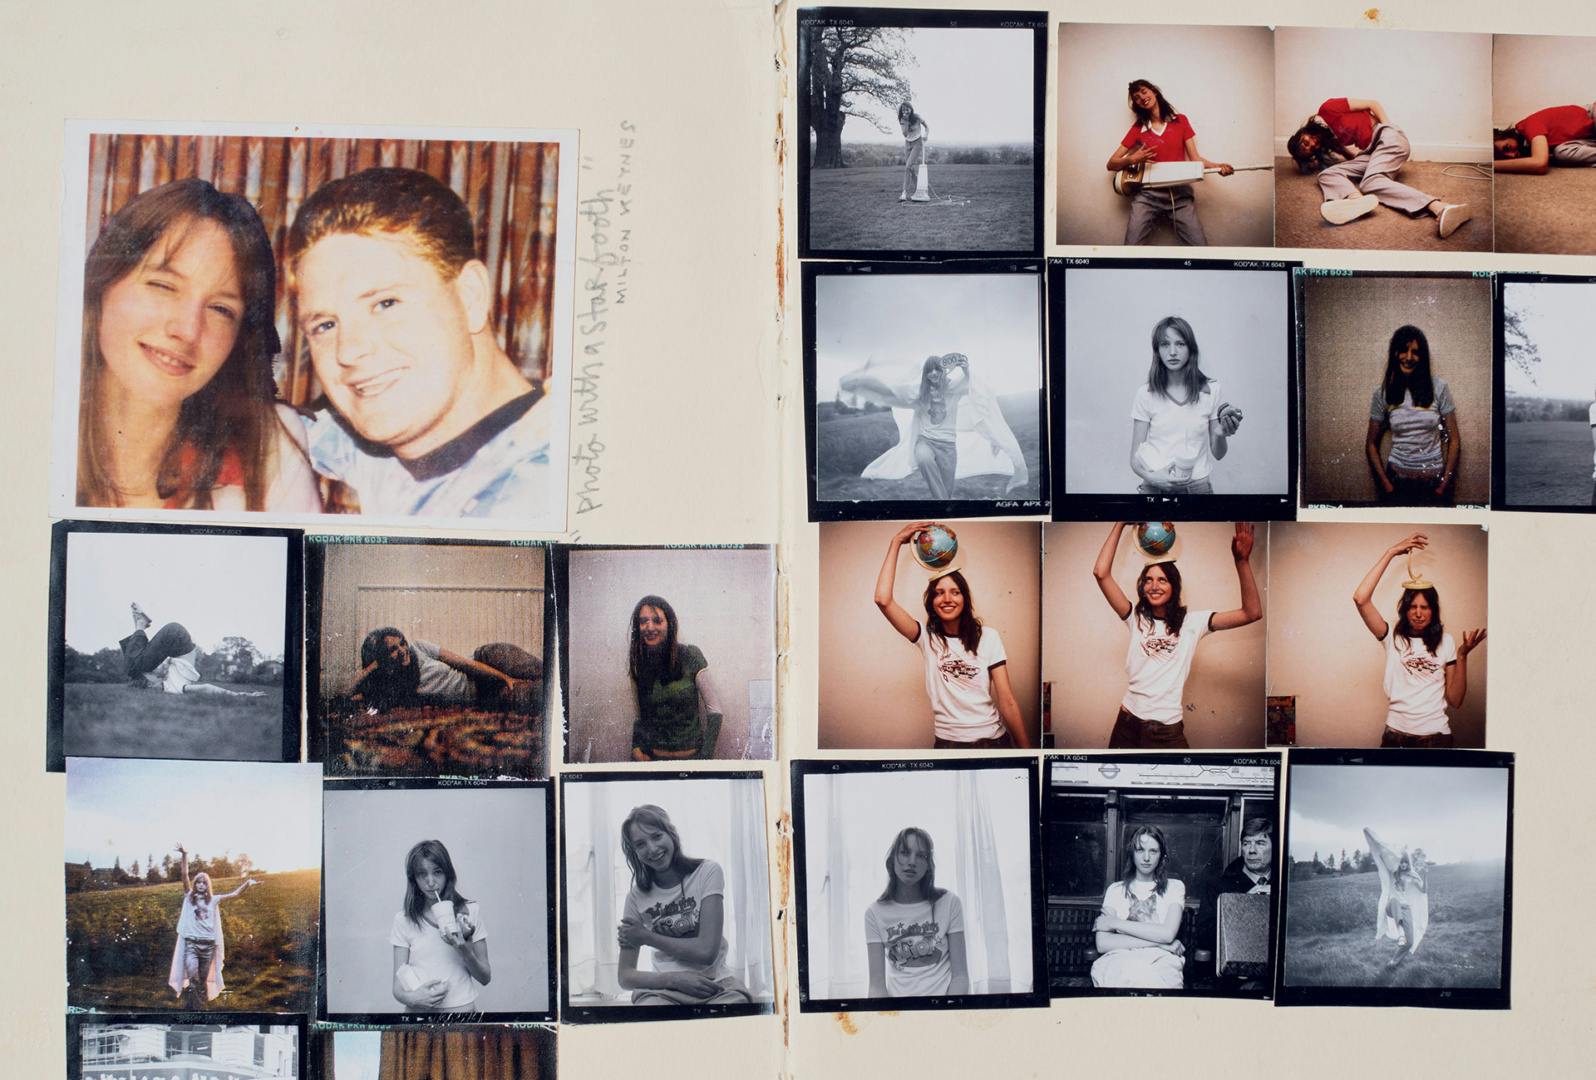 Rows of photos of young people grouped together in short sequences like film stills